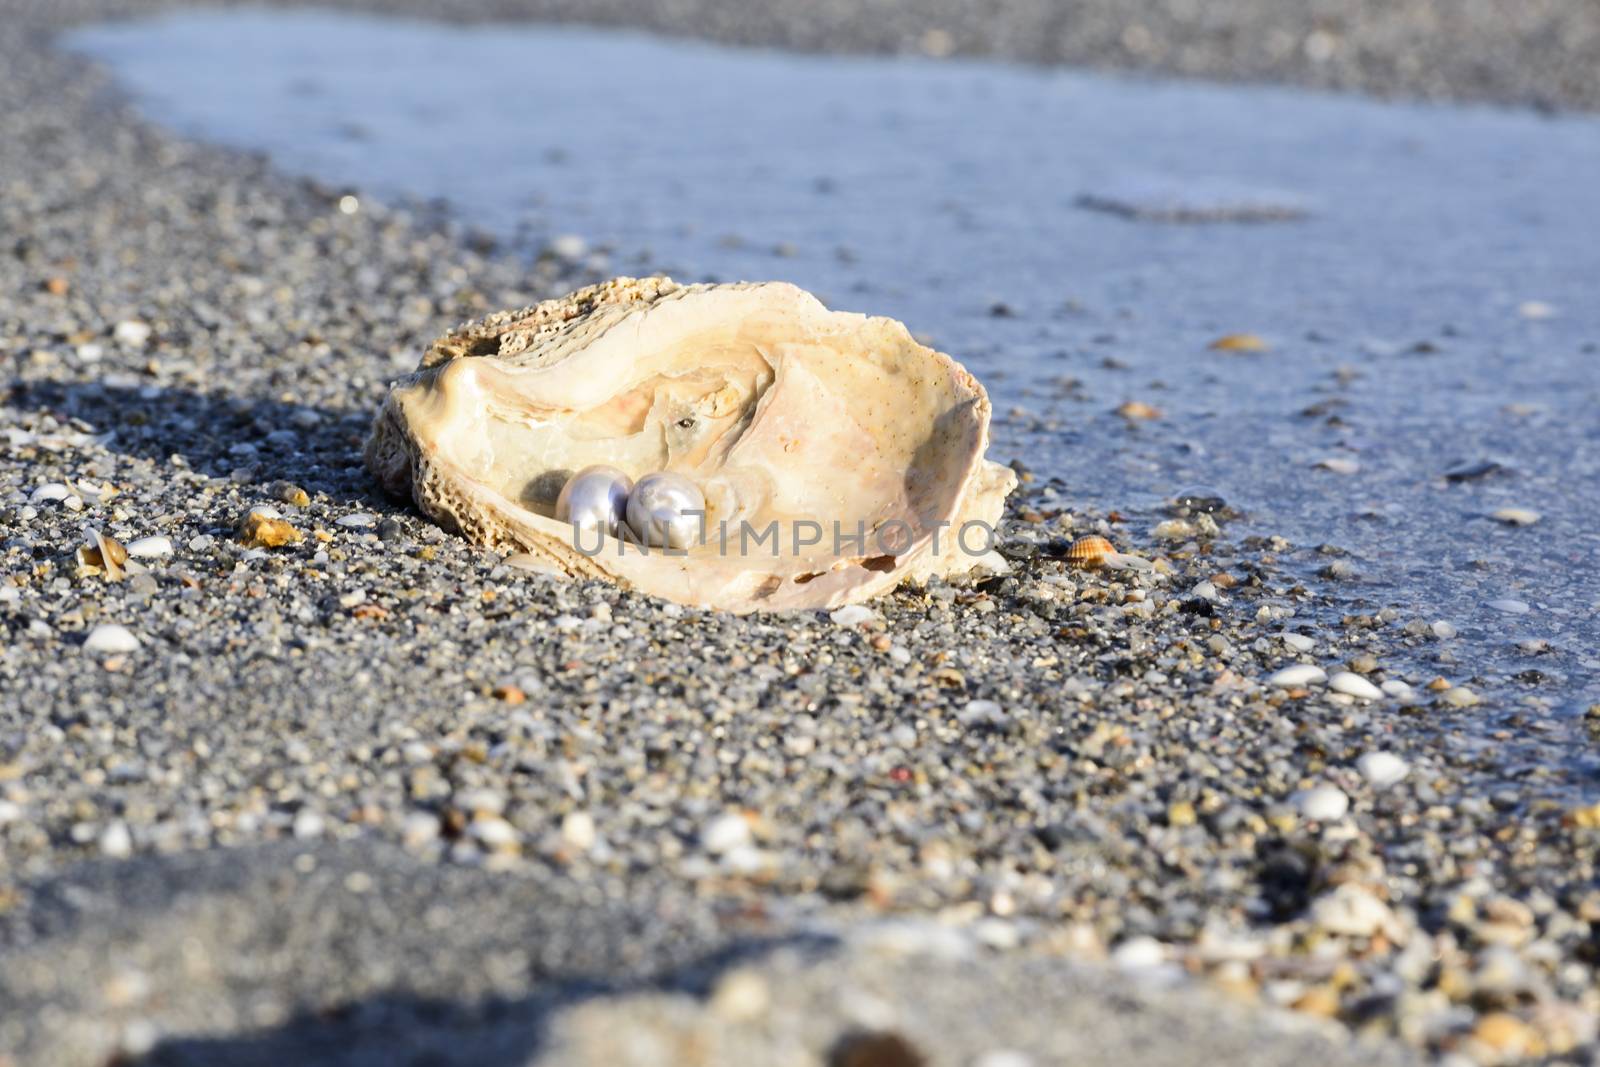 Australian pearls over an old shell on the beach washed by the waves of the sea.